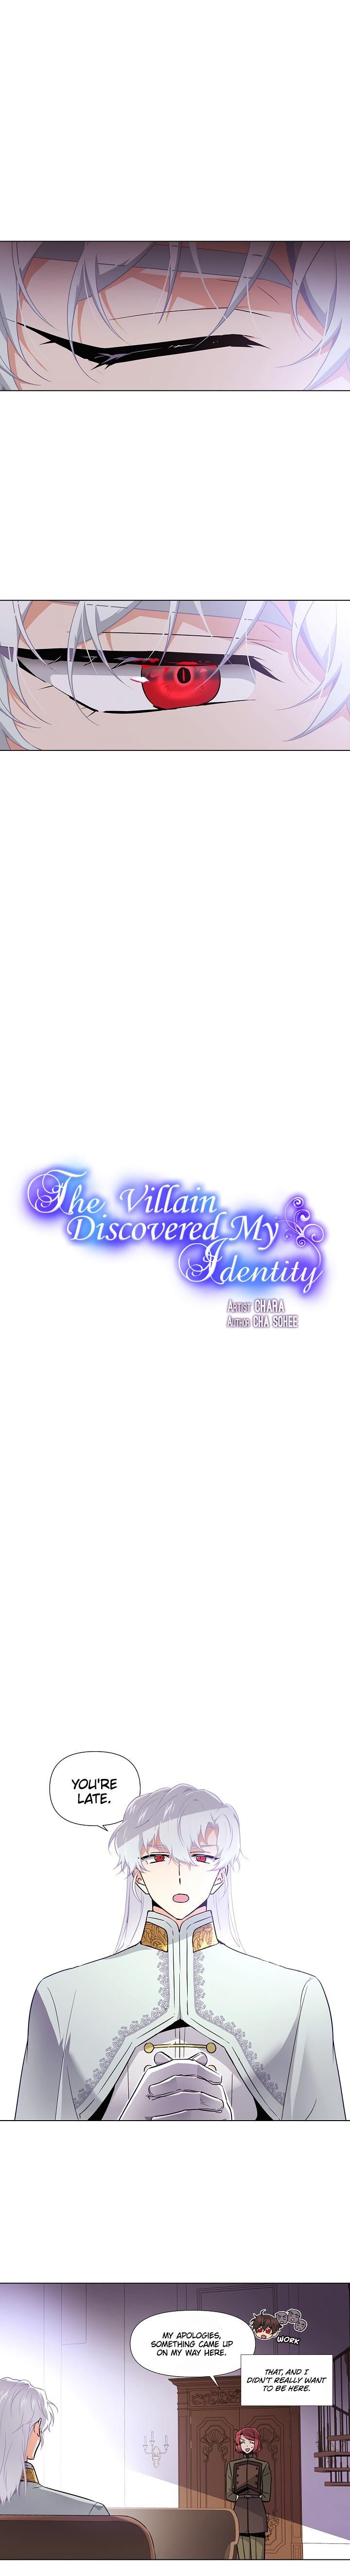 the-villain-discovered-my-identity-chap-21-2